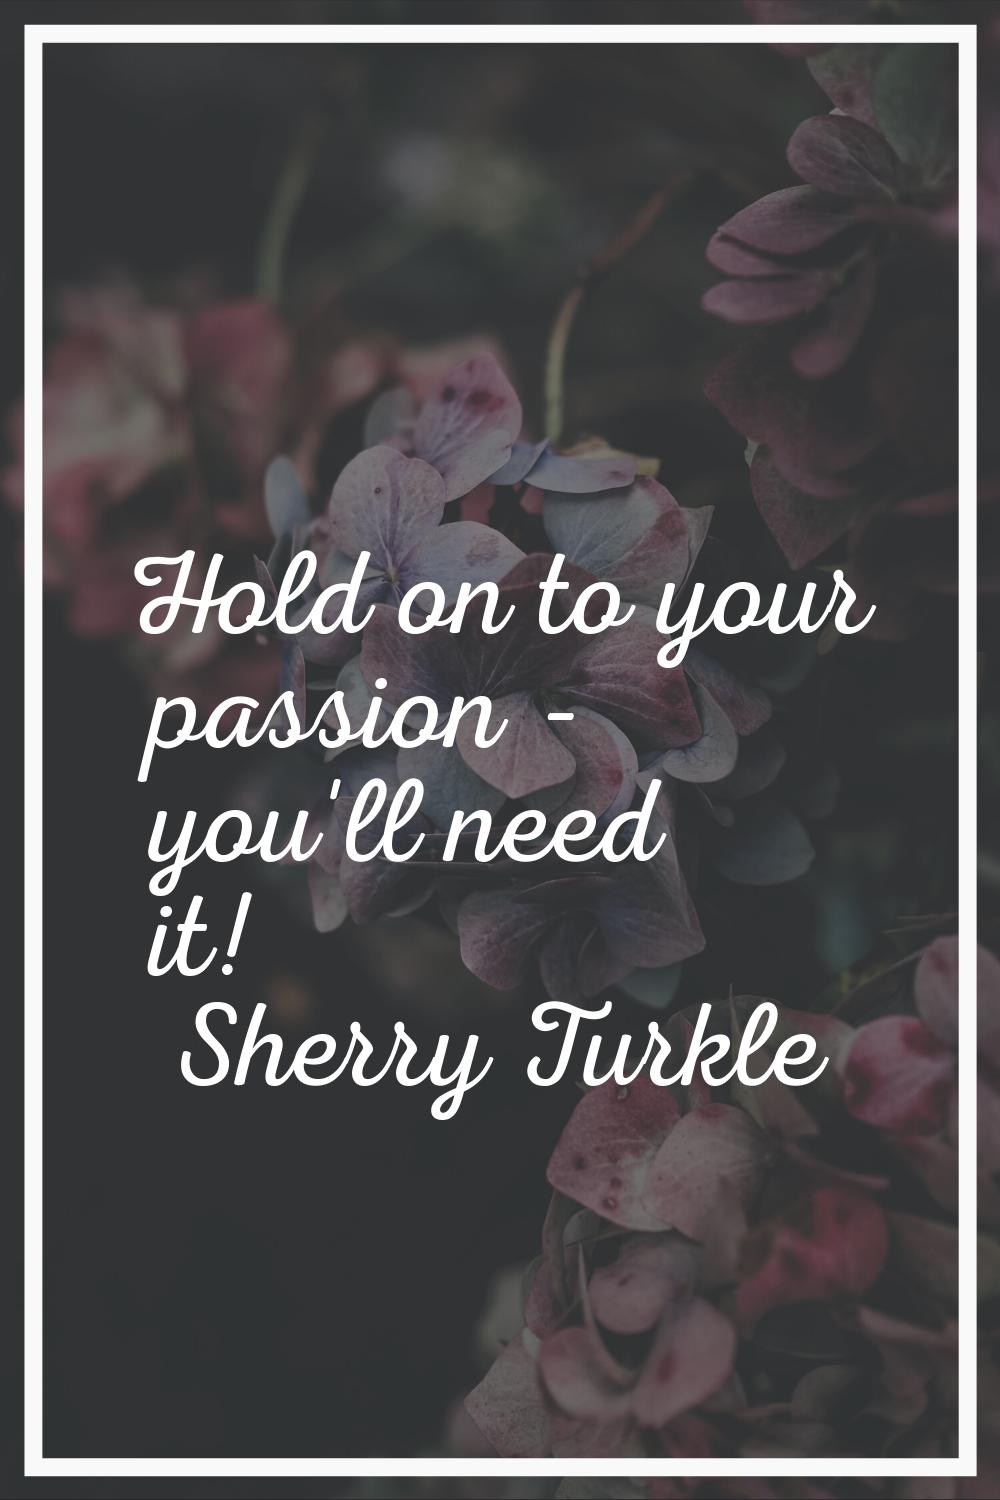 Hold on to your passion - you'll need it!